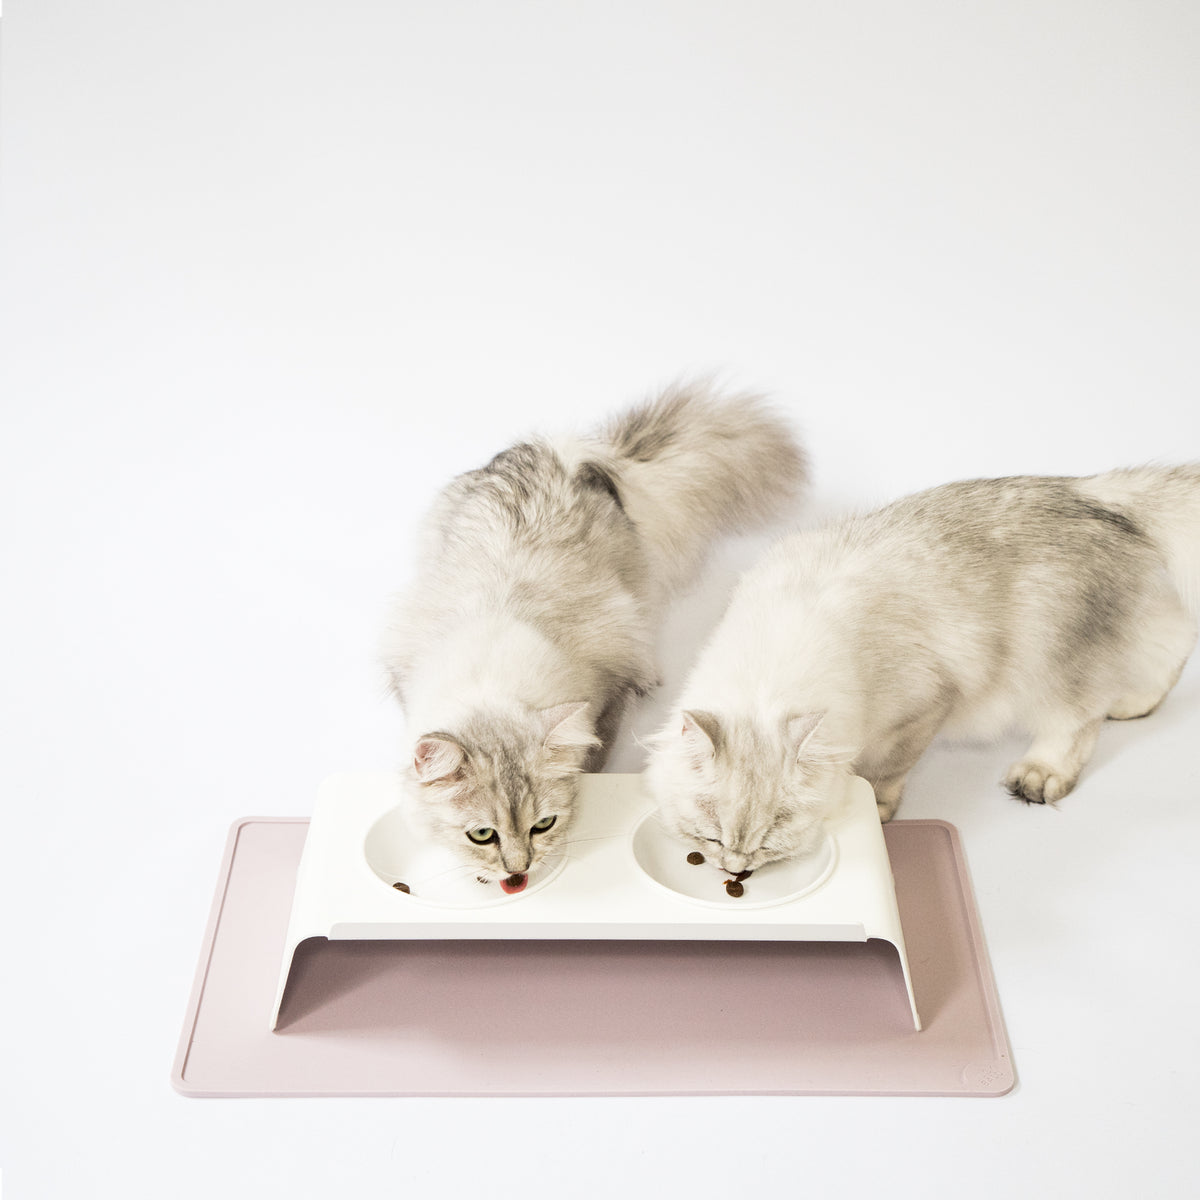 SQUARE - silicone cat food place mat